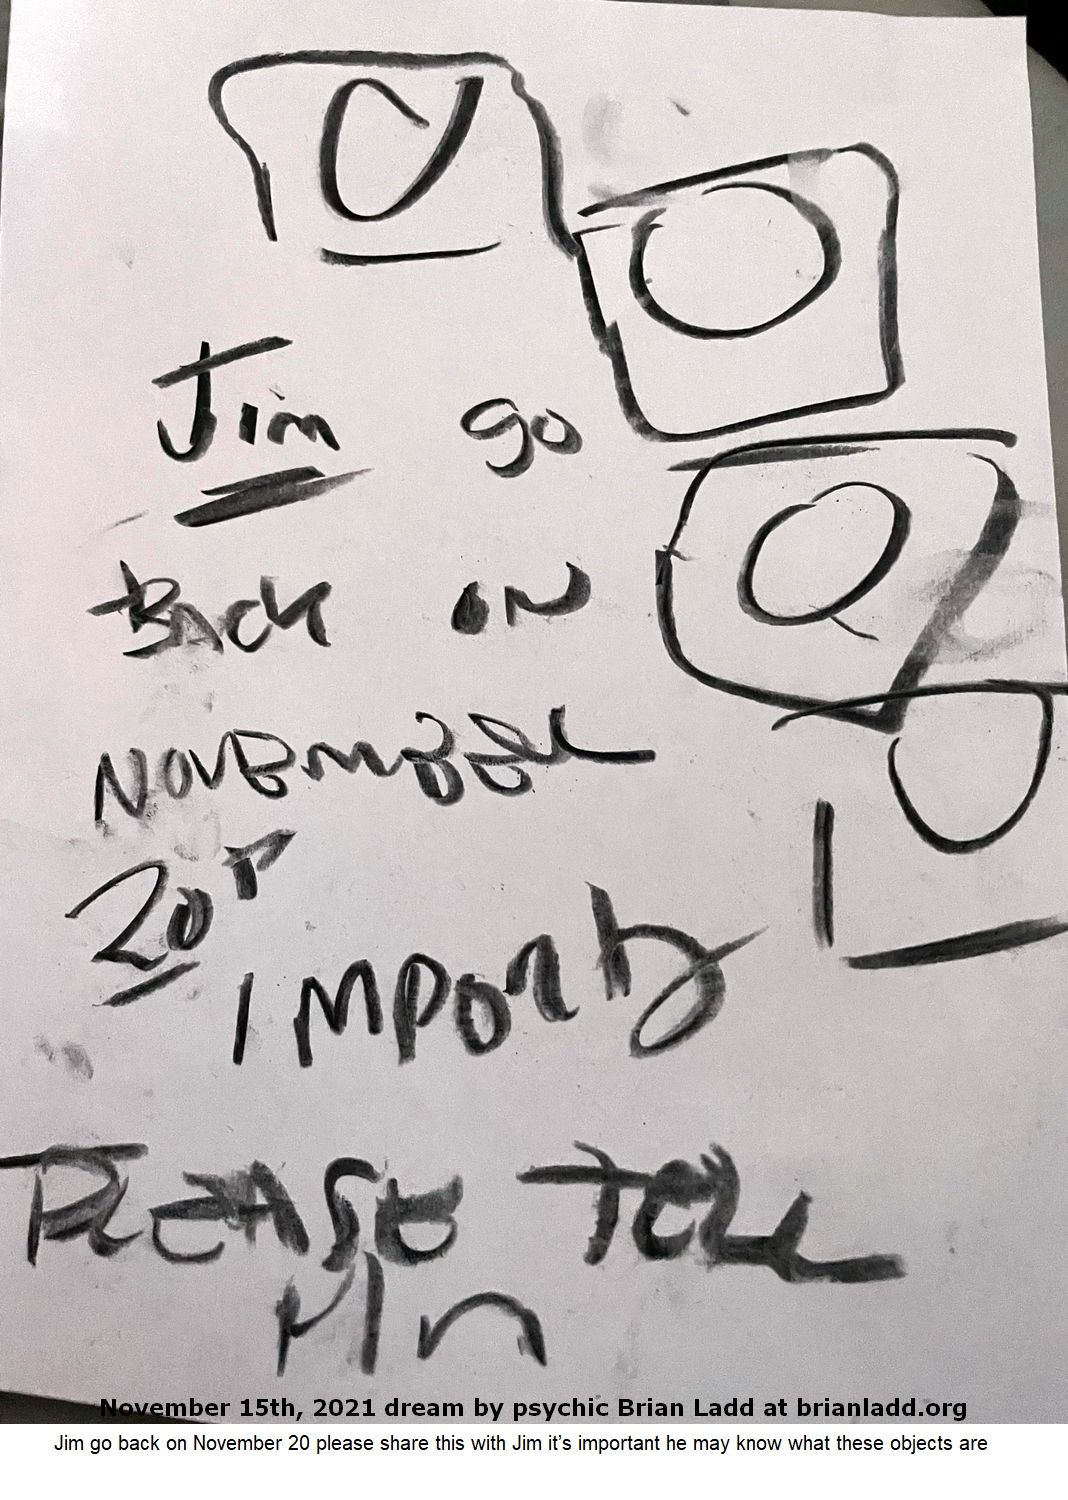 15 Nov 2021 2 Jim go back on November 20 please share this with Jim it’s important he may know what these objects are...
Jim go back on November 20 please share this with Jim it’s important he may know what these objects are.
